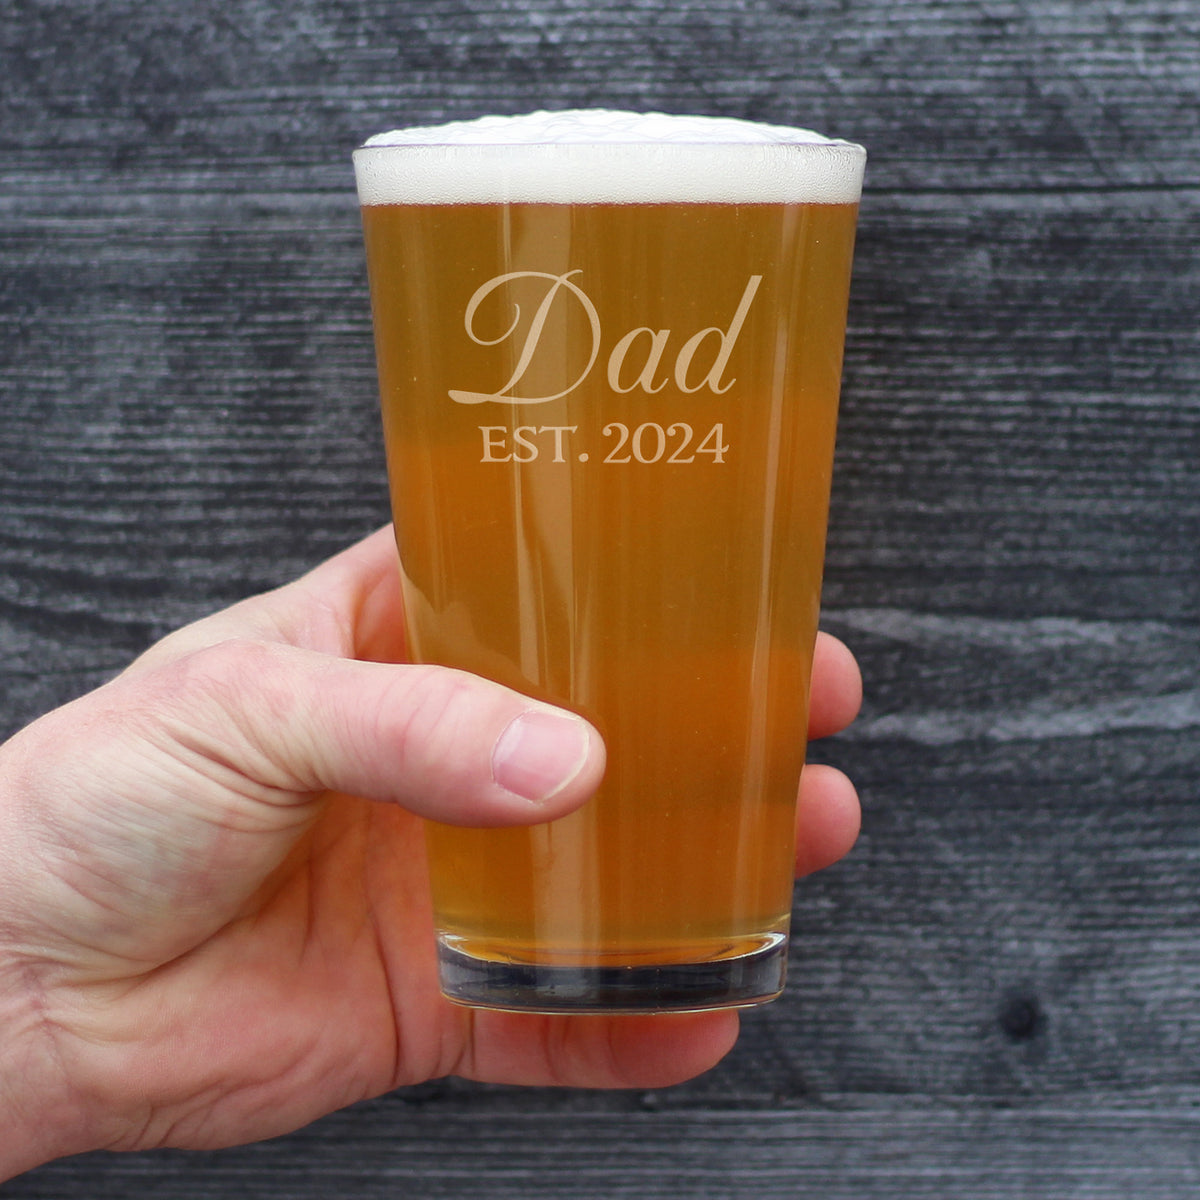 Dad Est 2024 - New Father Pint Glass Gift for First Time Parents - Decorative 16 Oz Glasses